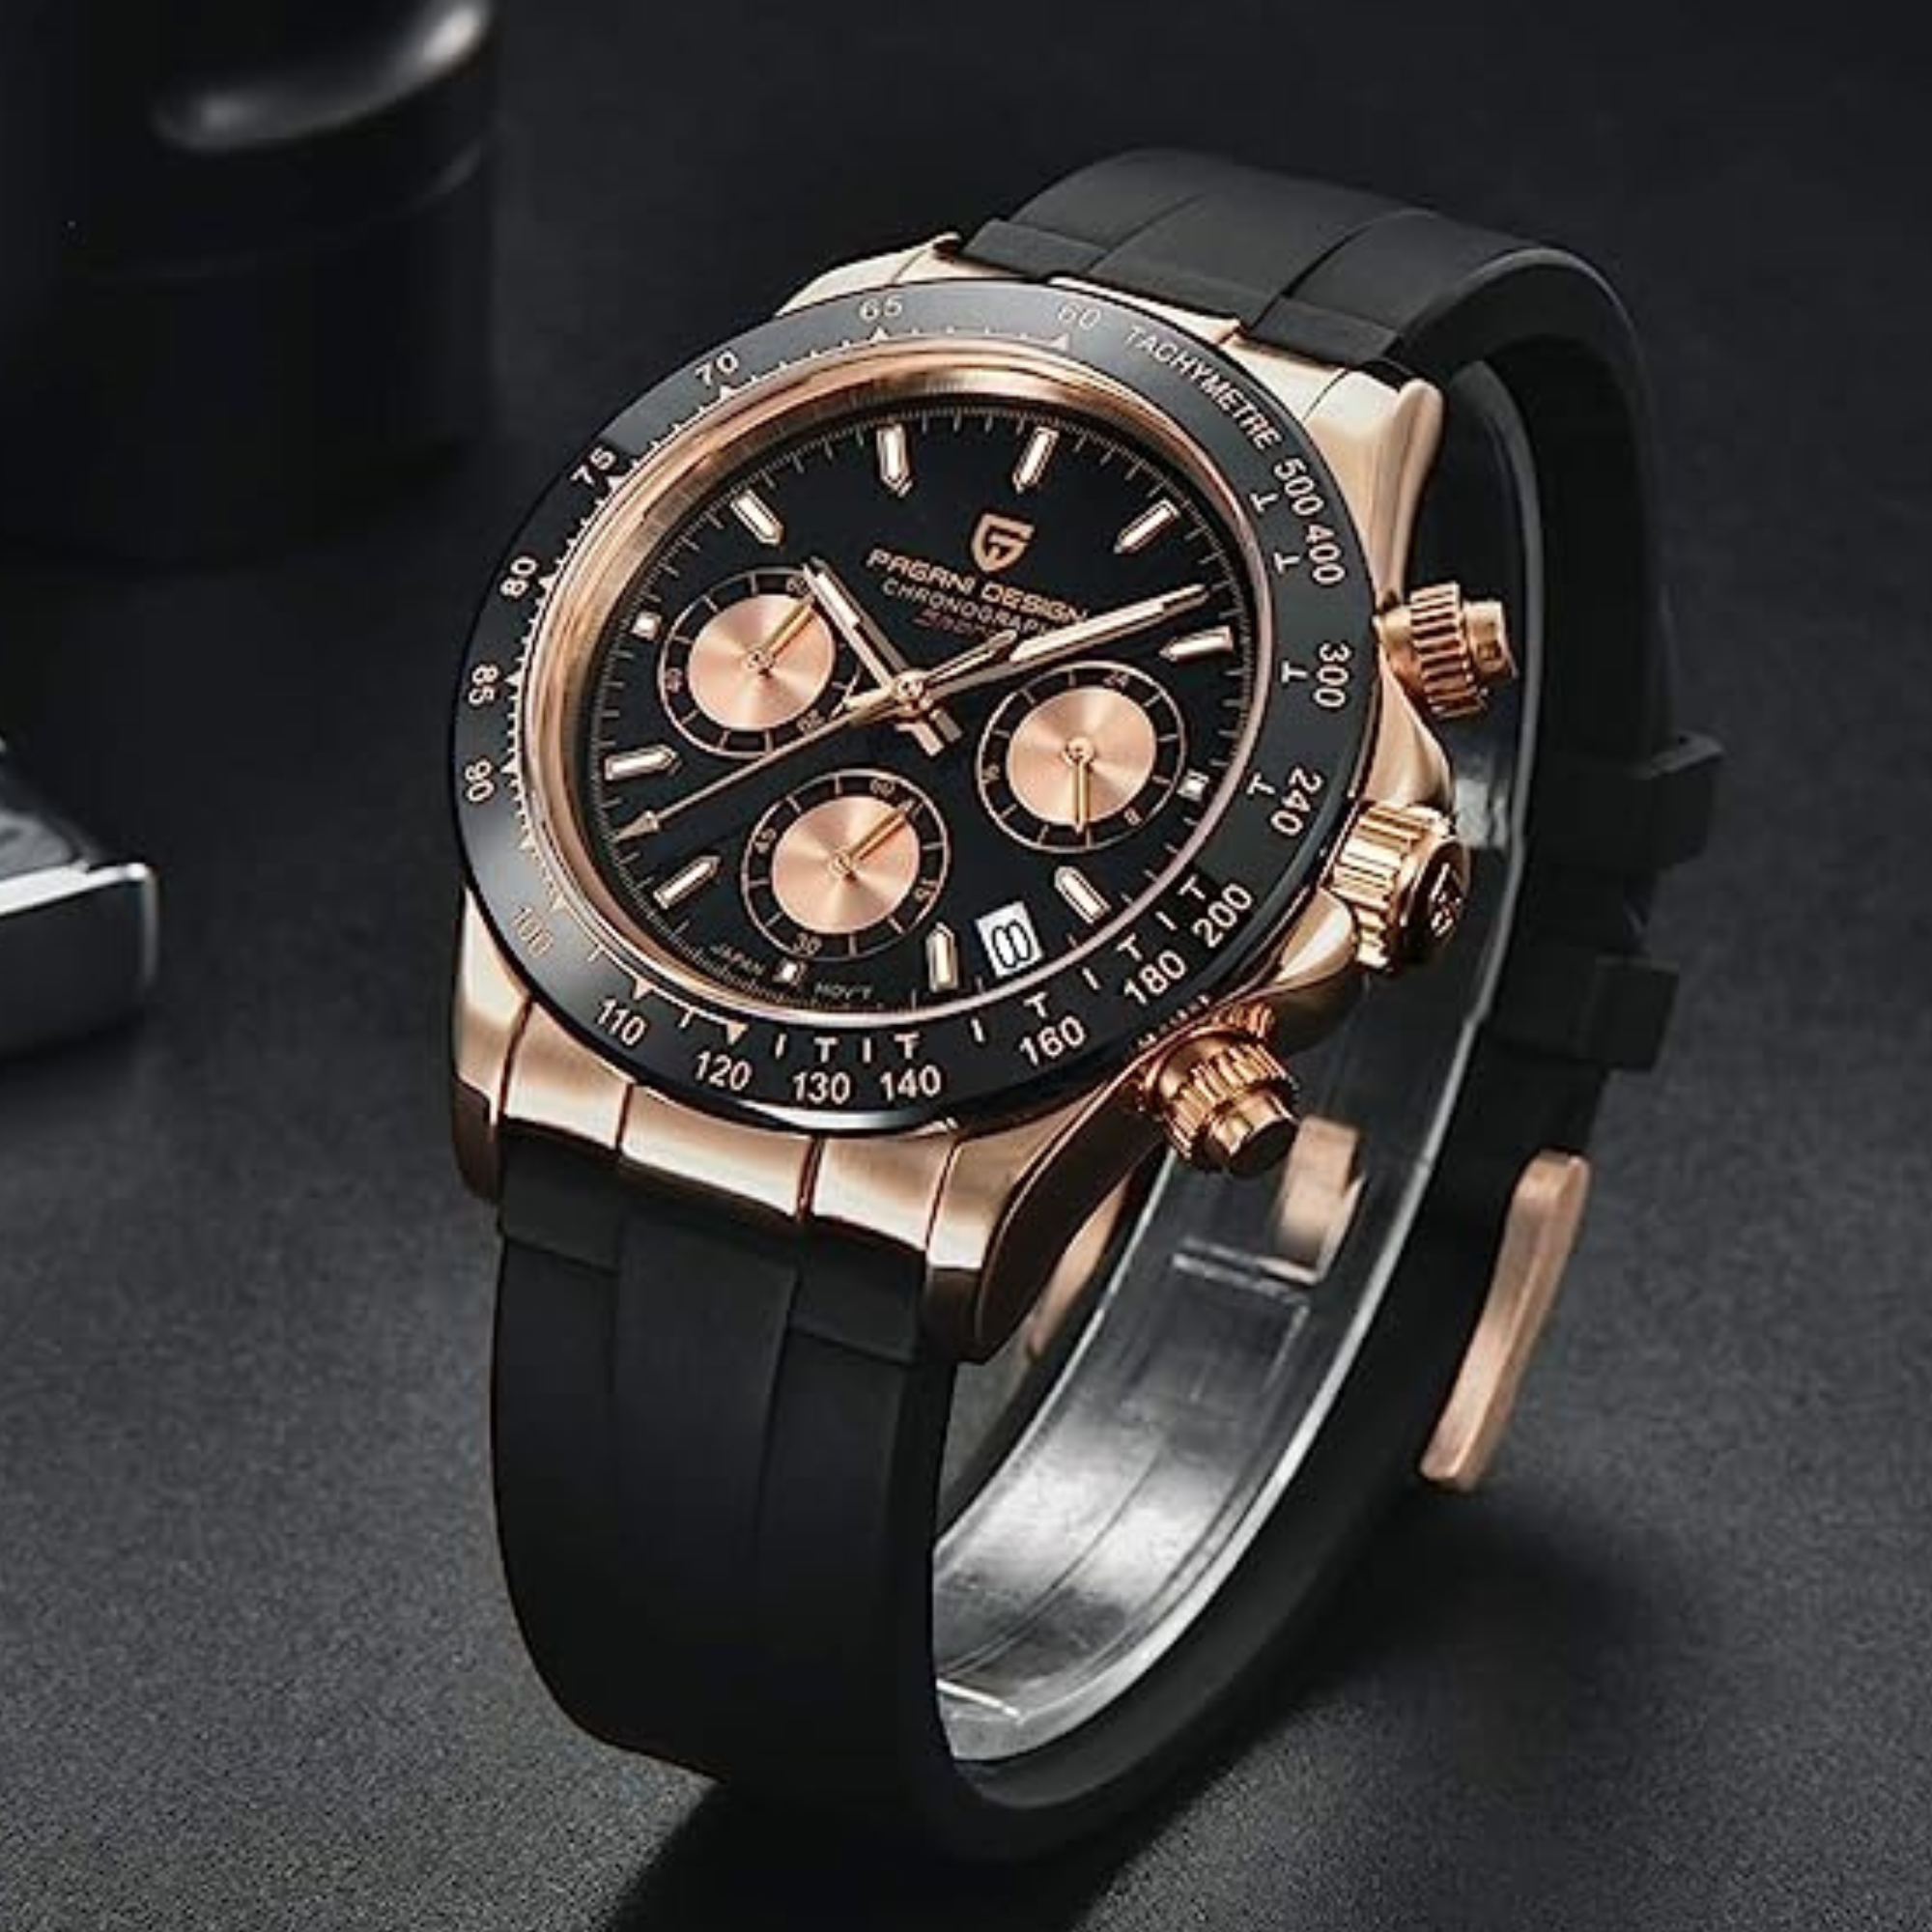 OFFICIAL PAGANI DESIGN WATCHES INDIA DREAM WATCHES, 42% pic